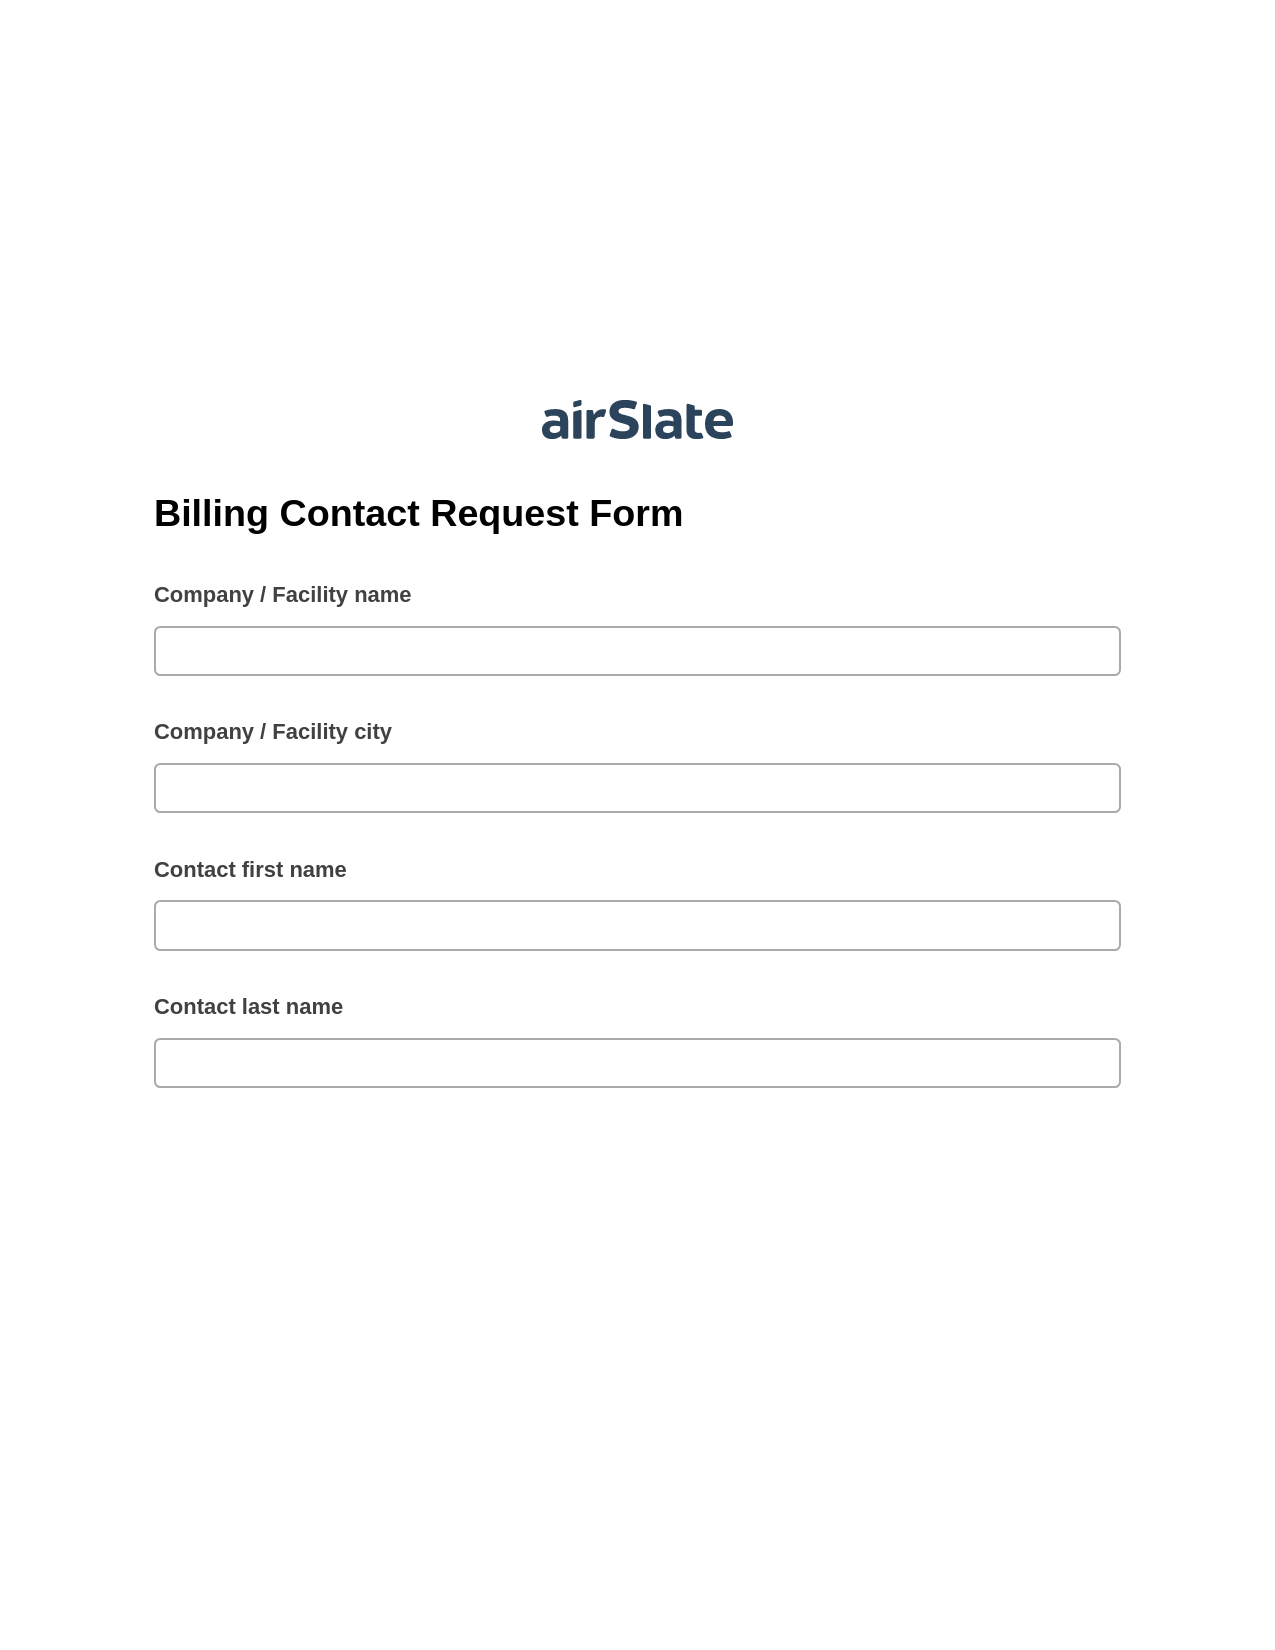 Multirole Billing Contact Request Form Pre-fill from NetSuite Records Bot, Mailchimp add recipient to audience Bot, Archive to SharePoint Folder Bot